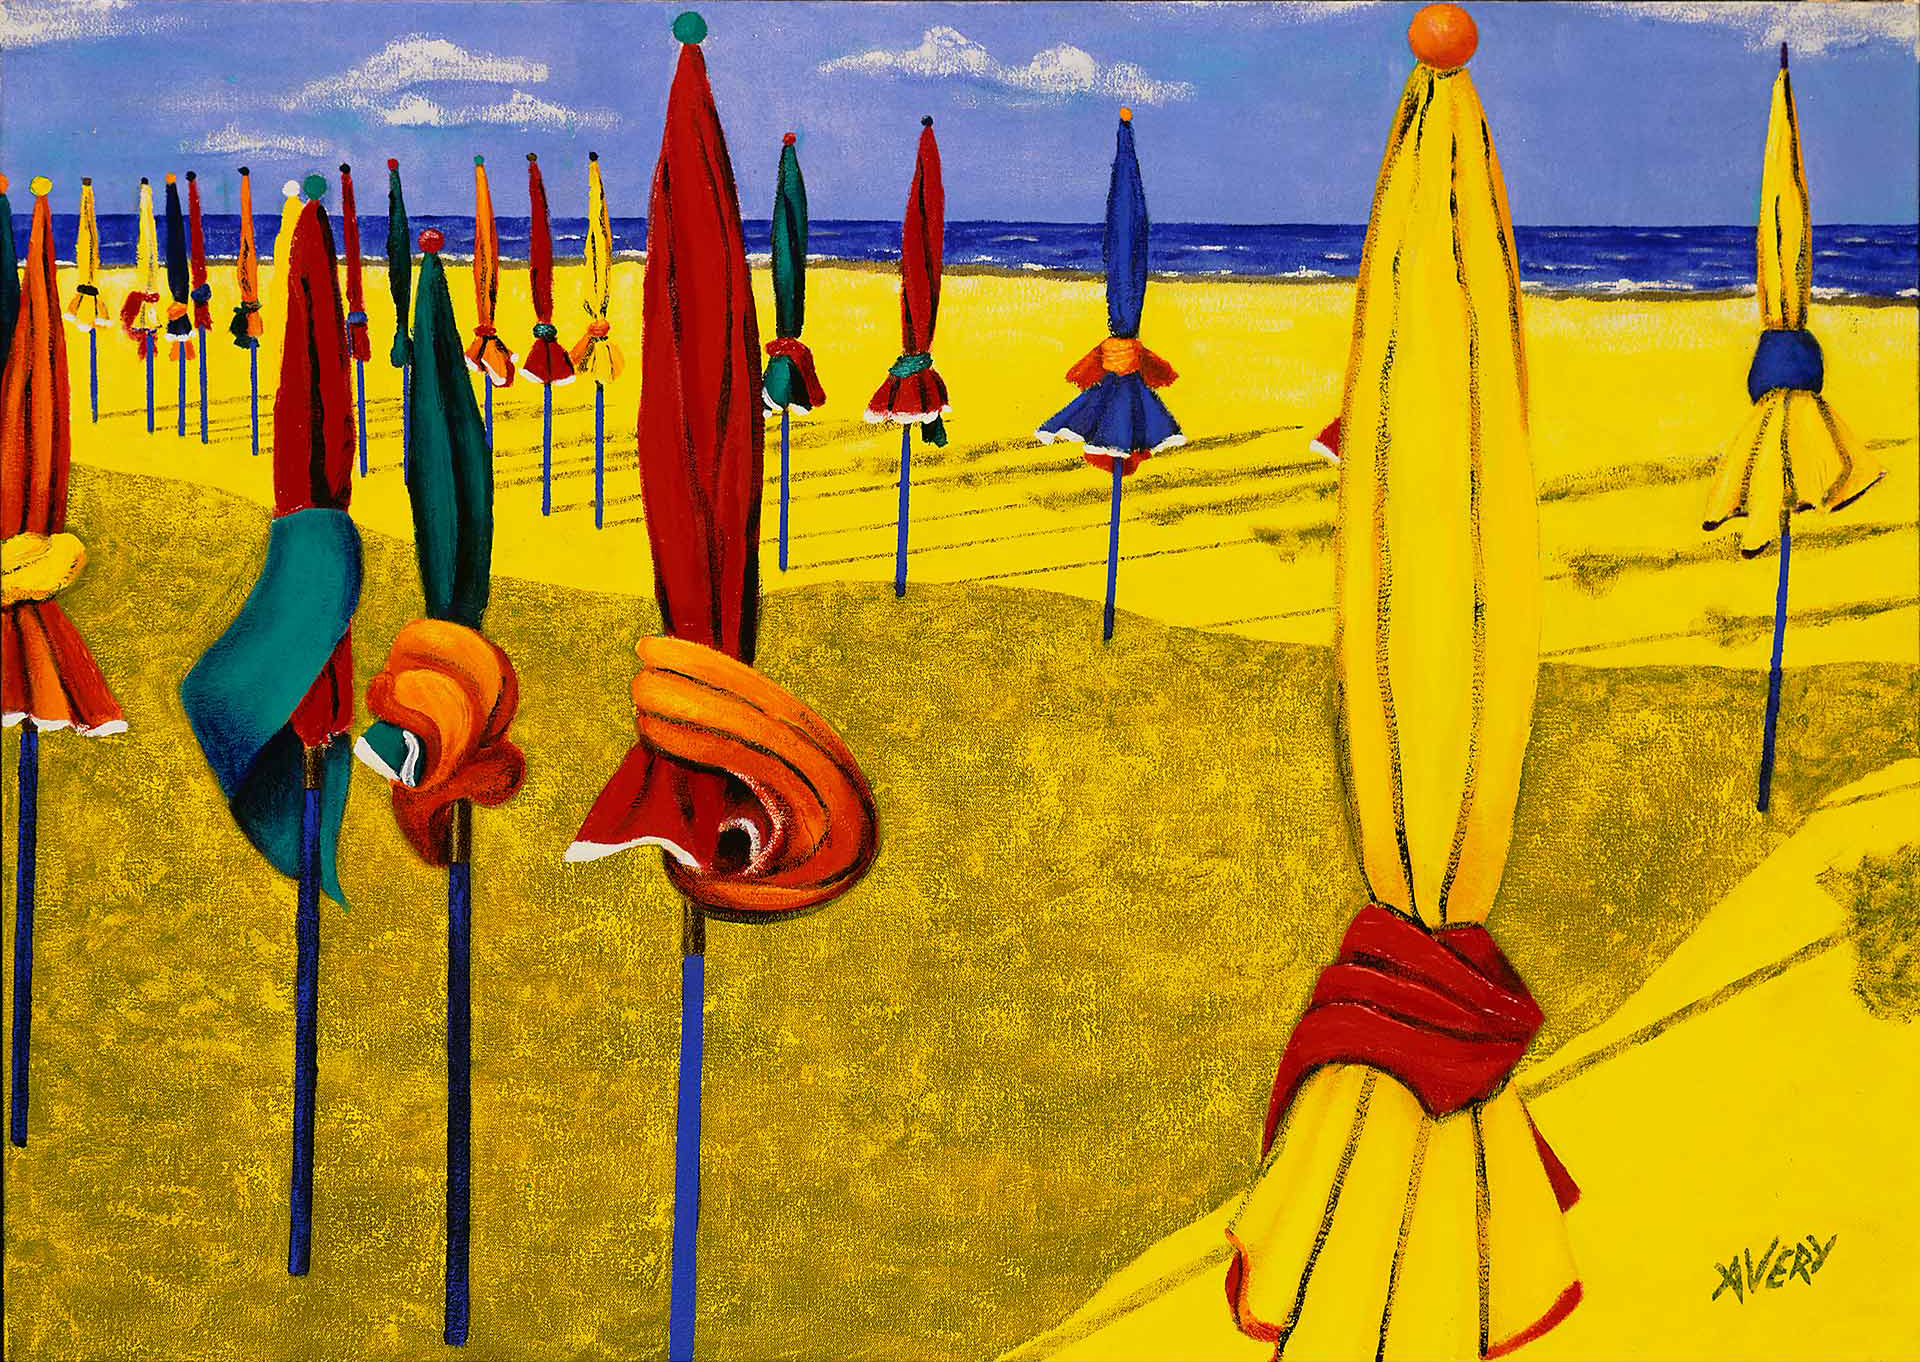 Lauren Avery Hutton | Deauville 1, Before Territory is Claimed, oil and sand, 40x30, 2001